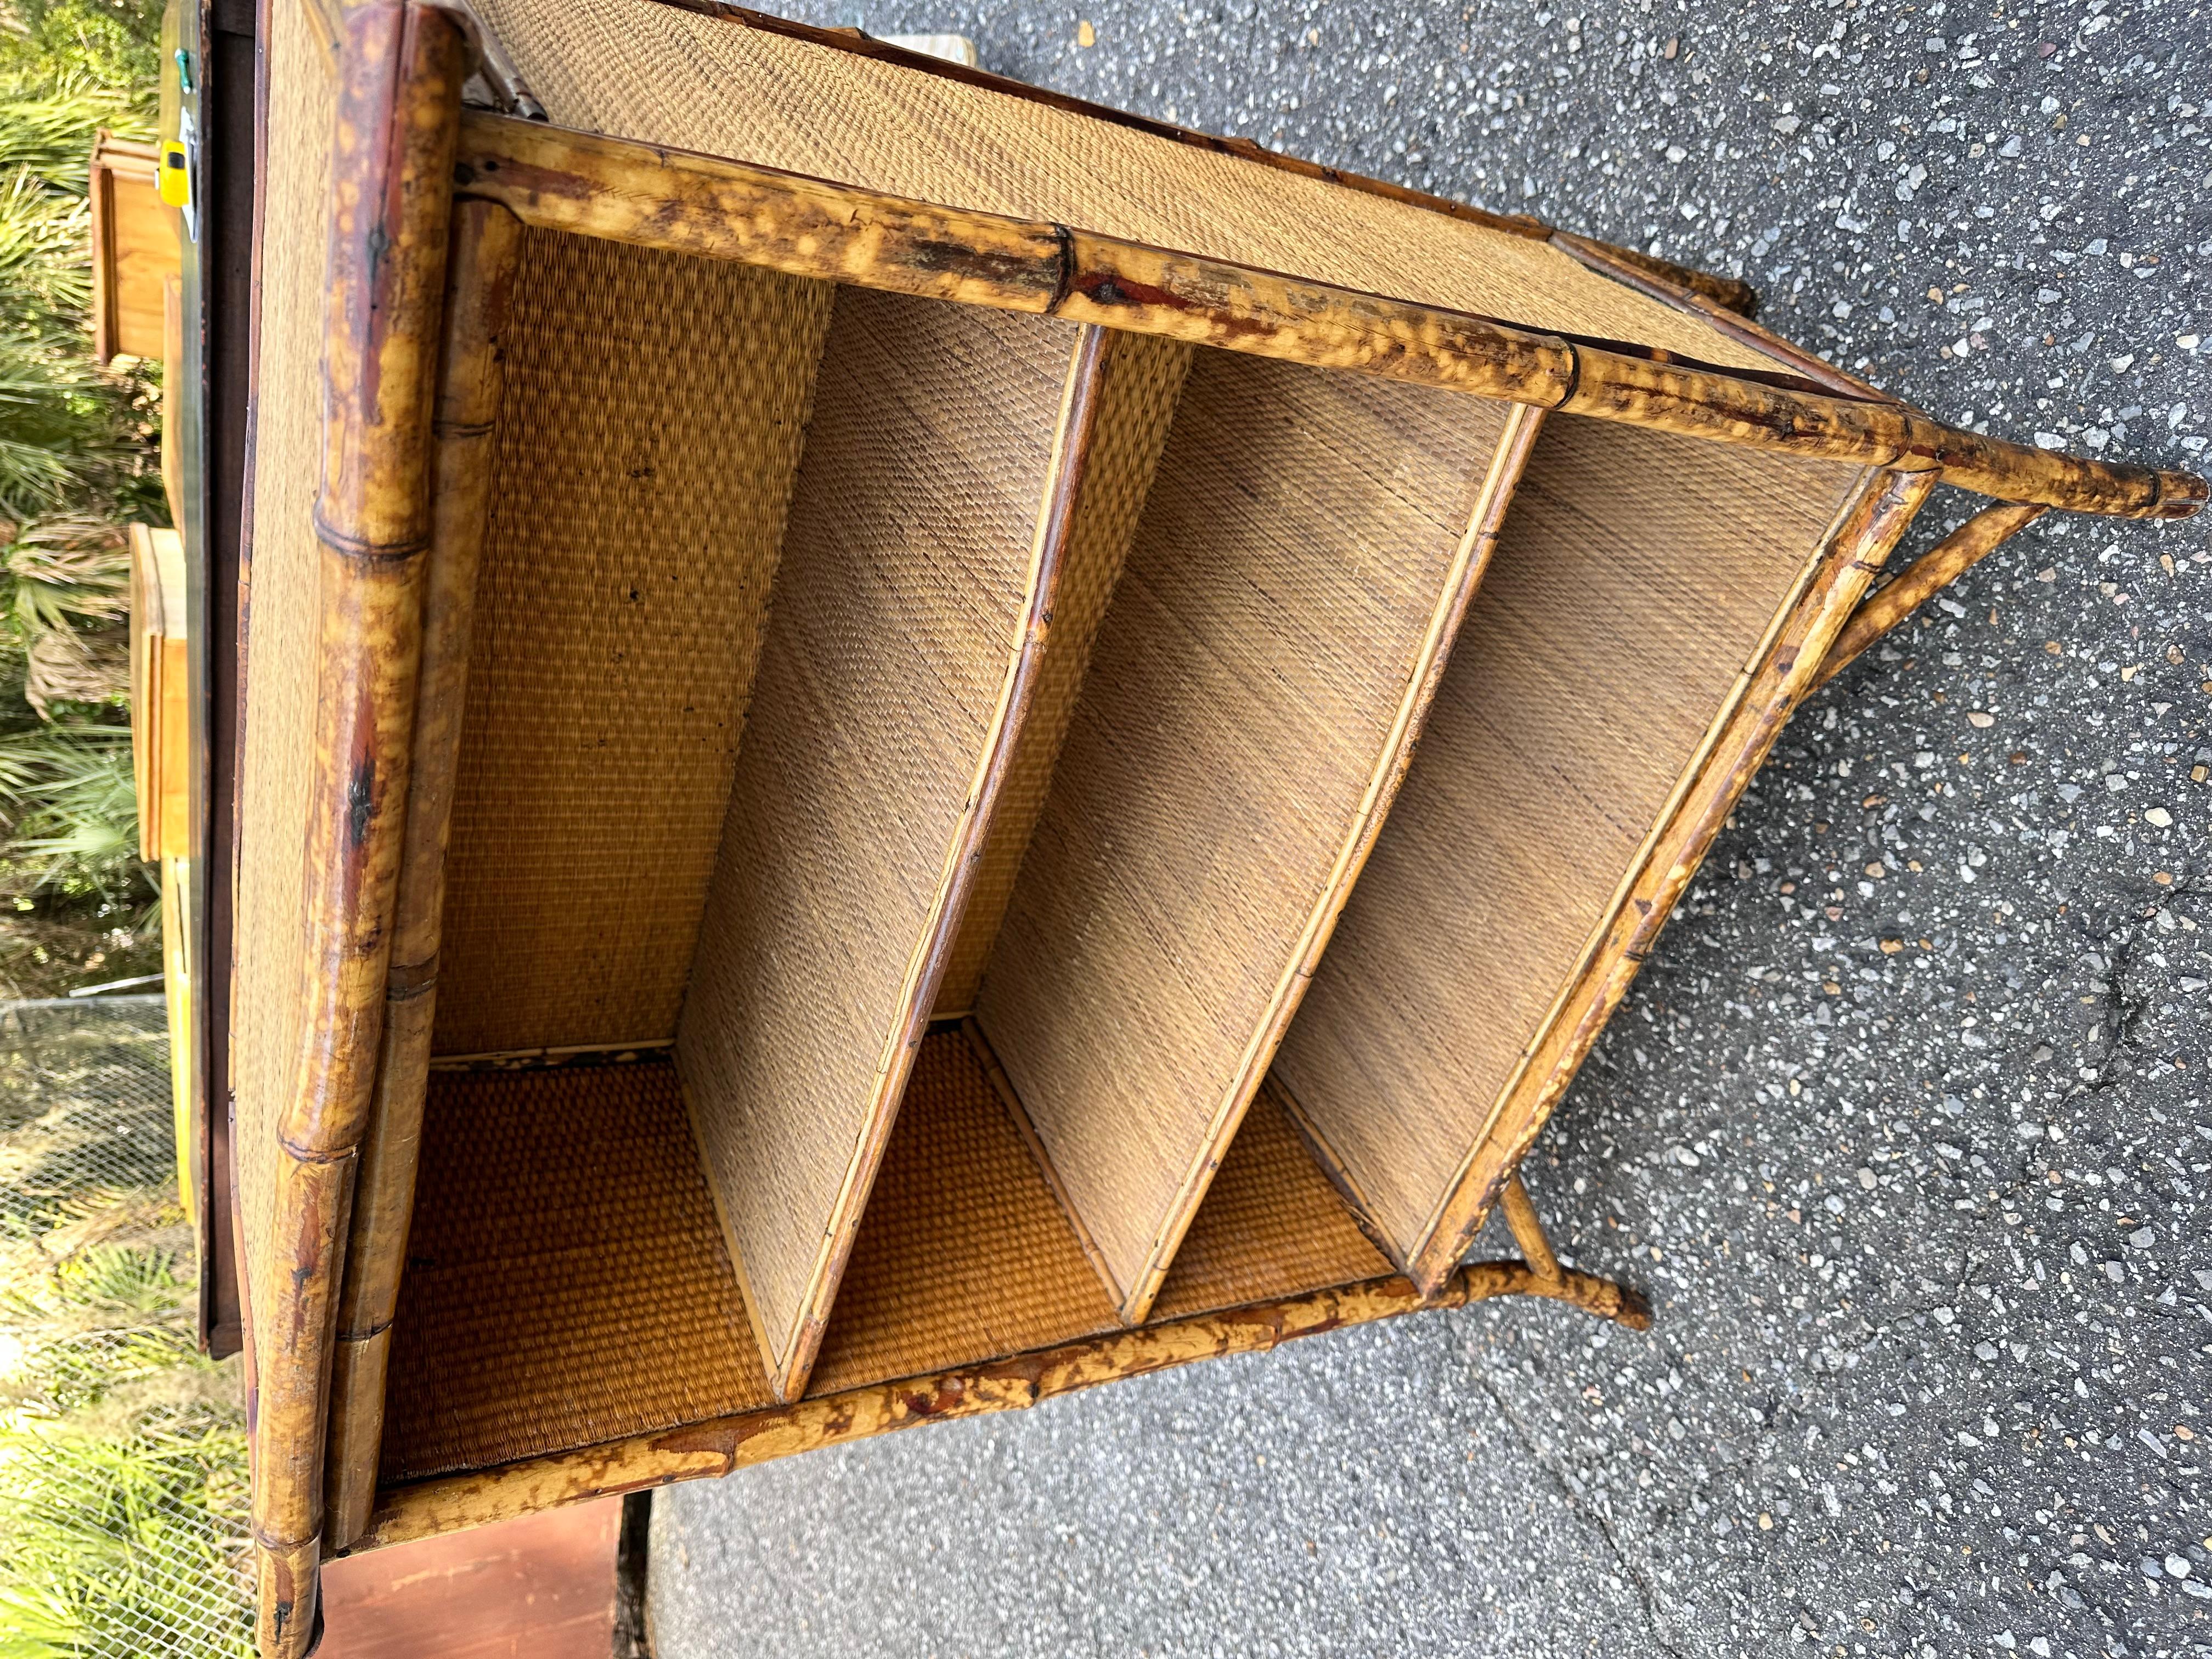 This 19th Century English bamboo book case is a lovely find. The shading of this item makes it particularly appealing and easy to mix alongside other wood tones to add variety and depth. Style, shading, and heritage make this is book case a triple